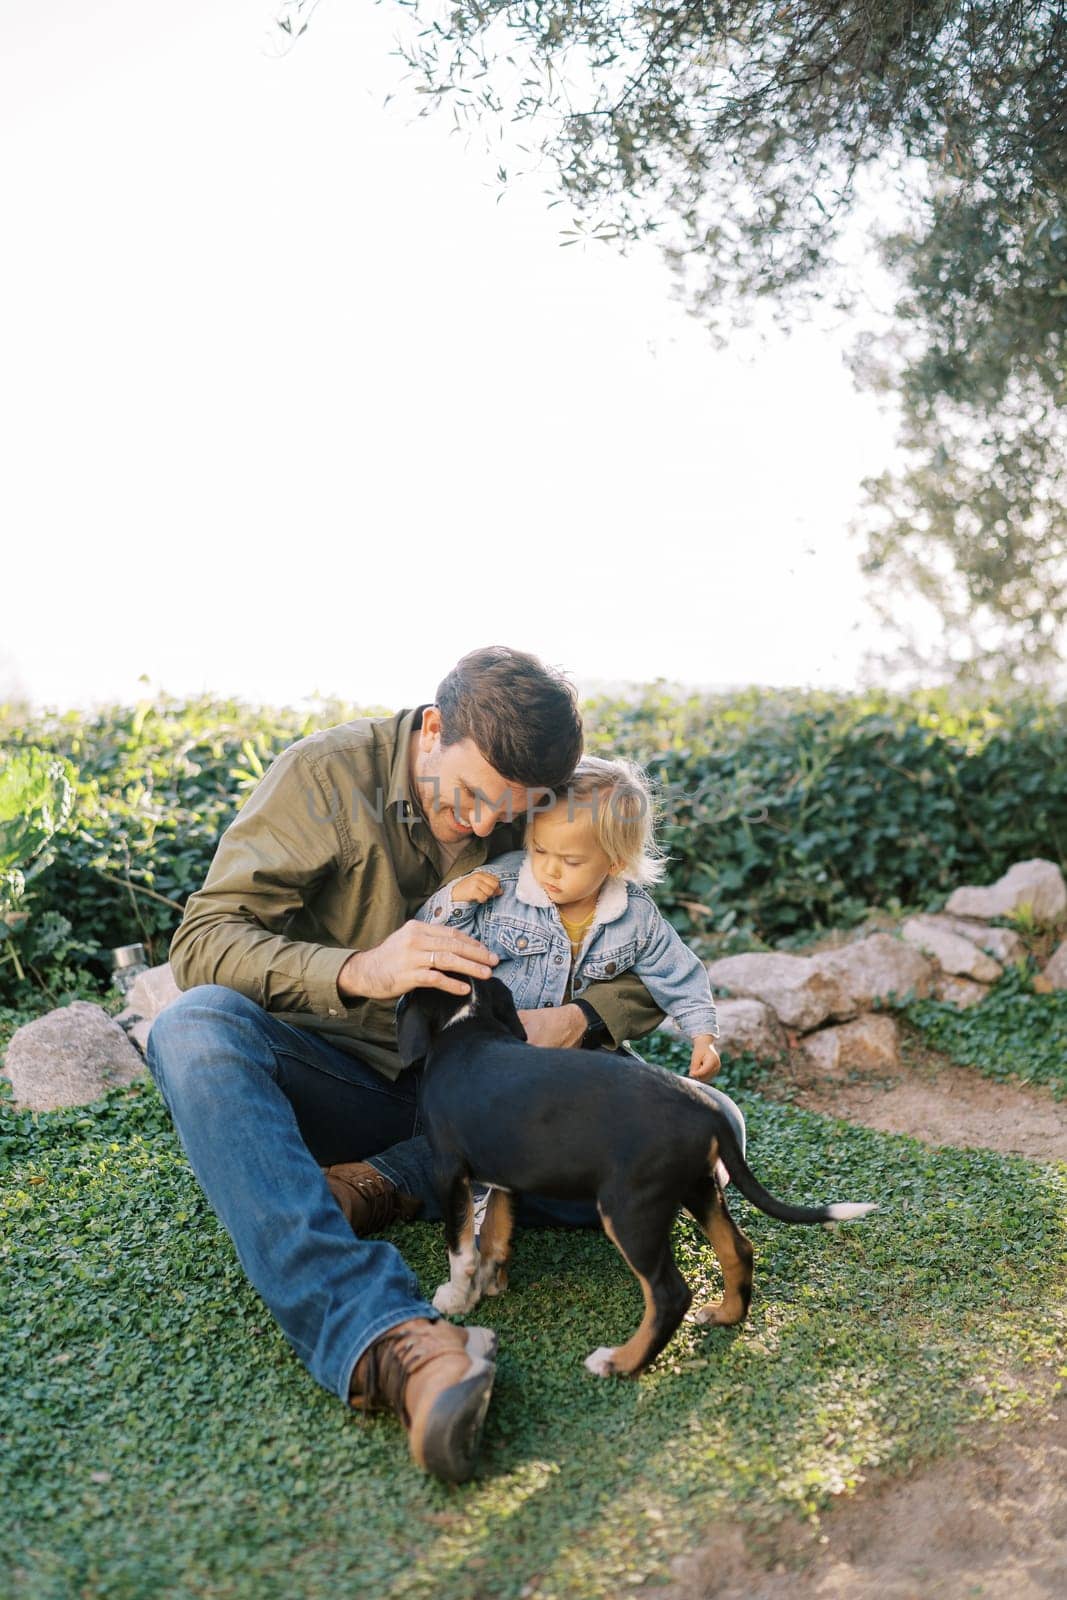 Smiling dad with a little girl in his arms sits on the lawn and pets a puppy. High quality photo